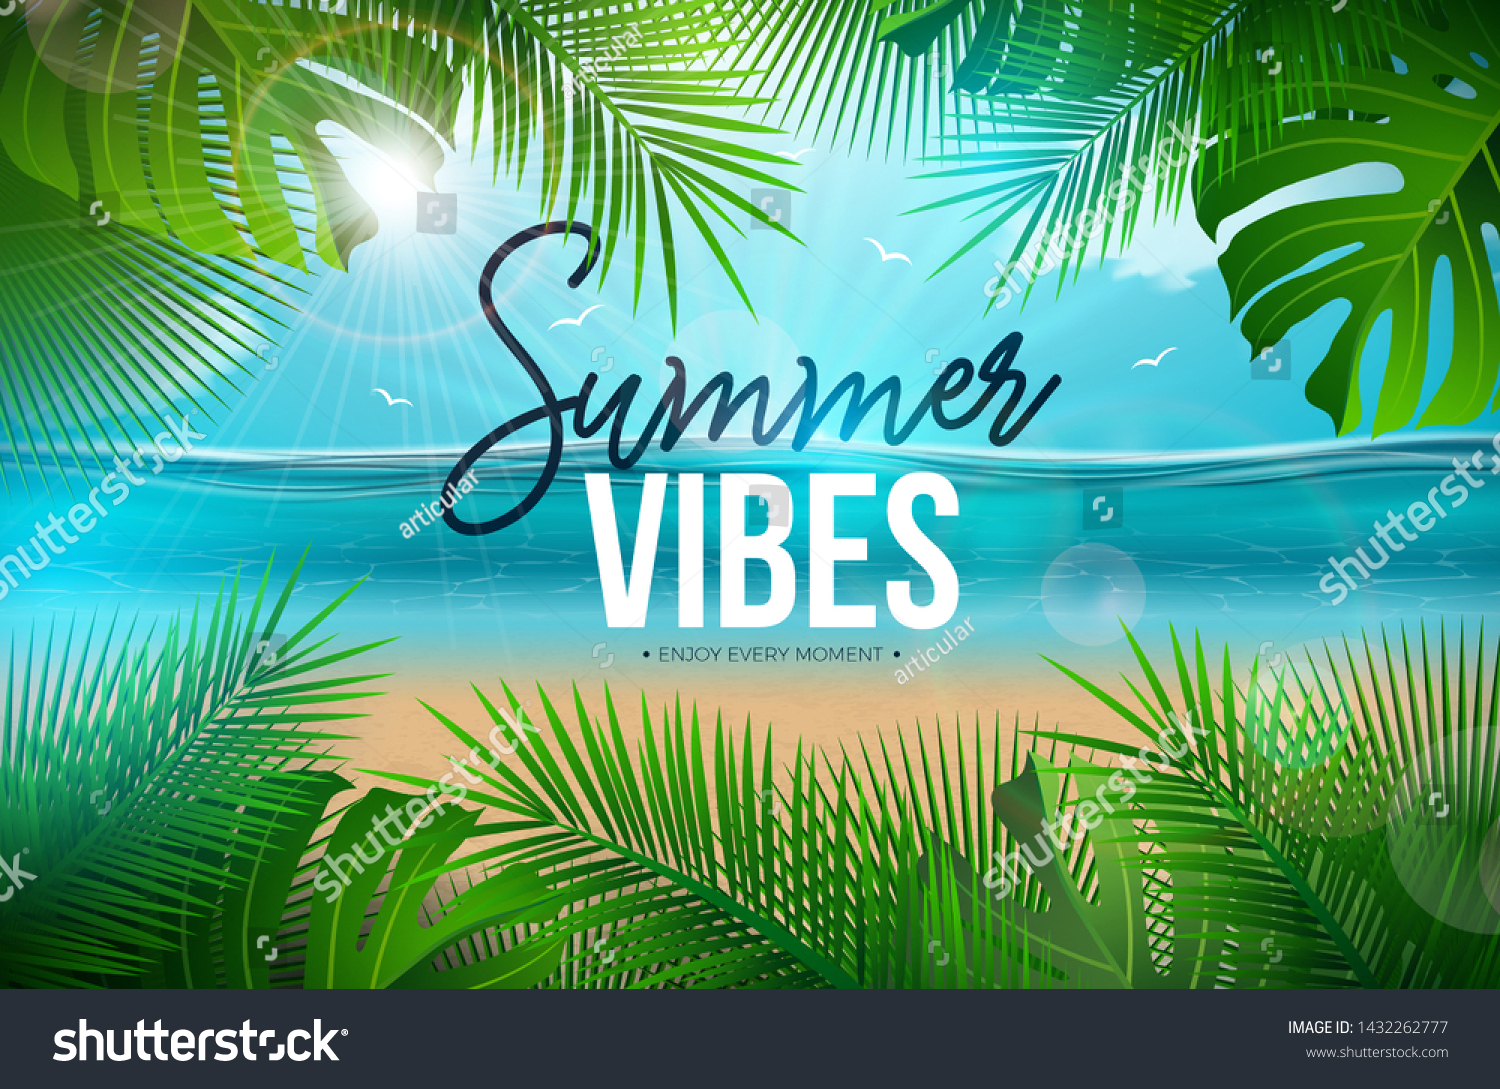 5,400 Summer vibes beach party Images, Stock Photos & Vectors ...